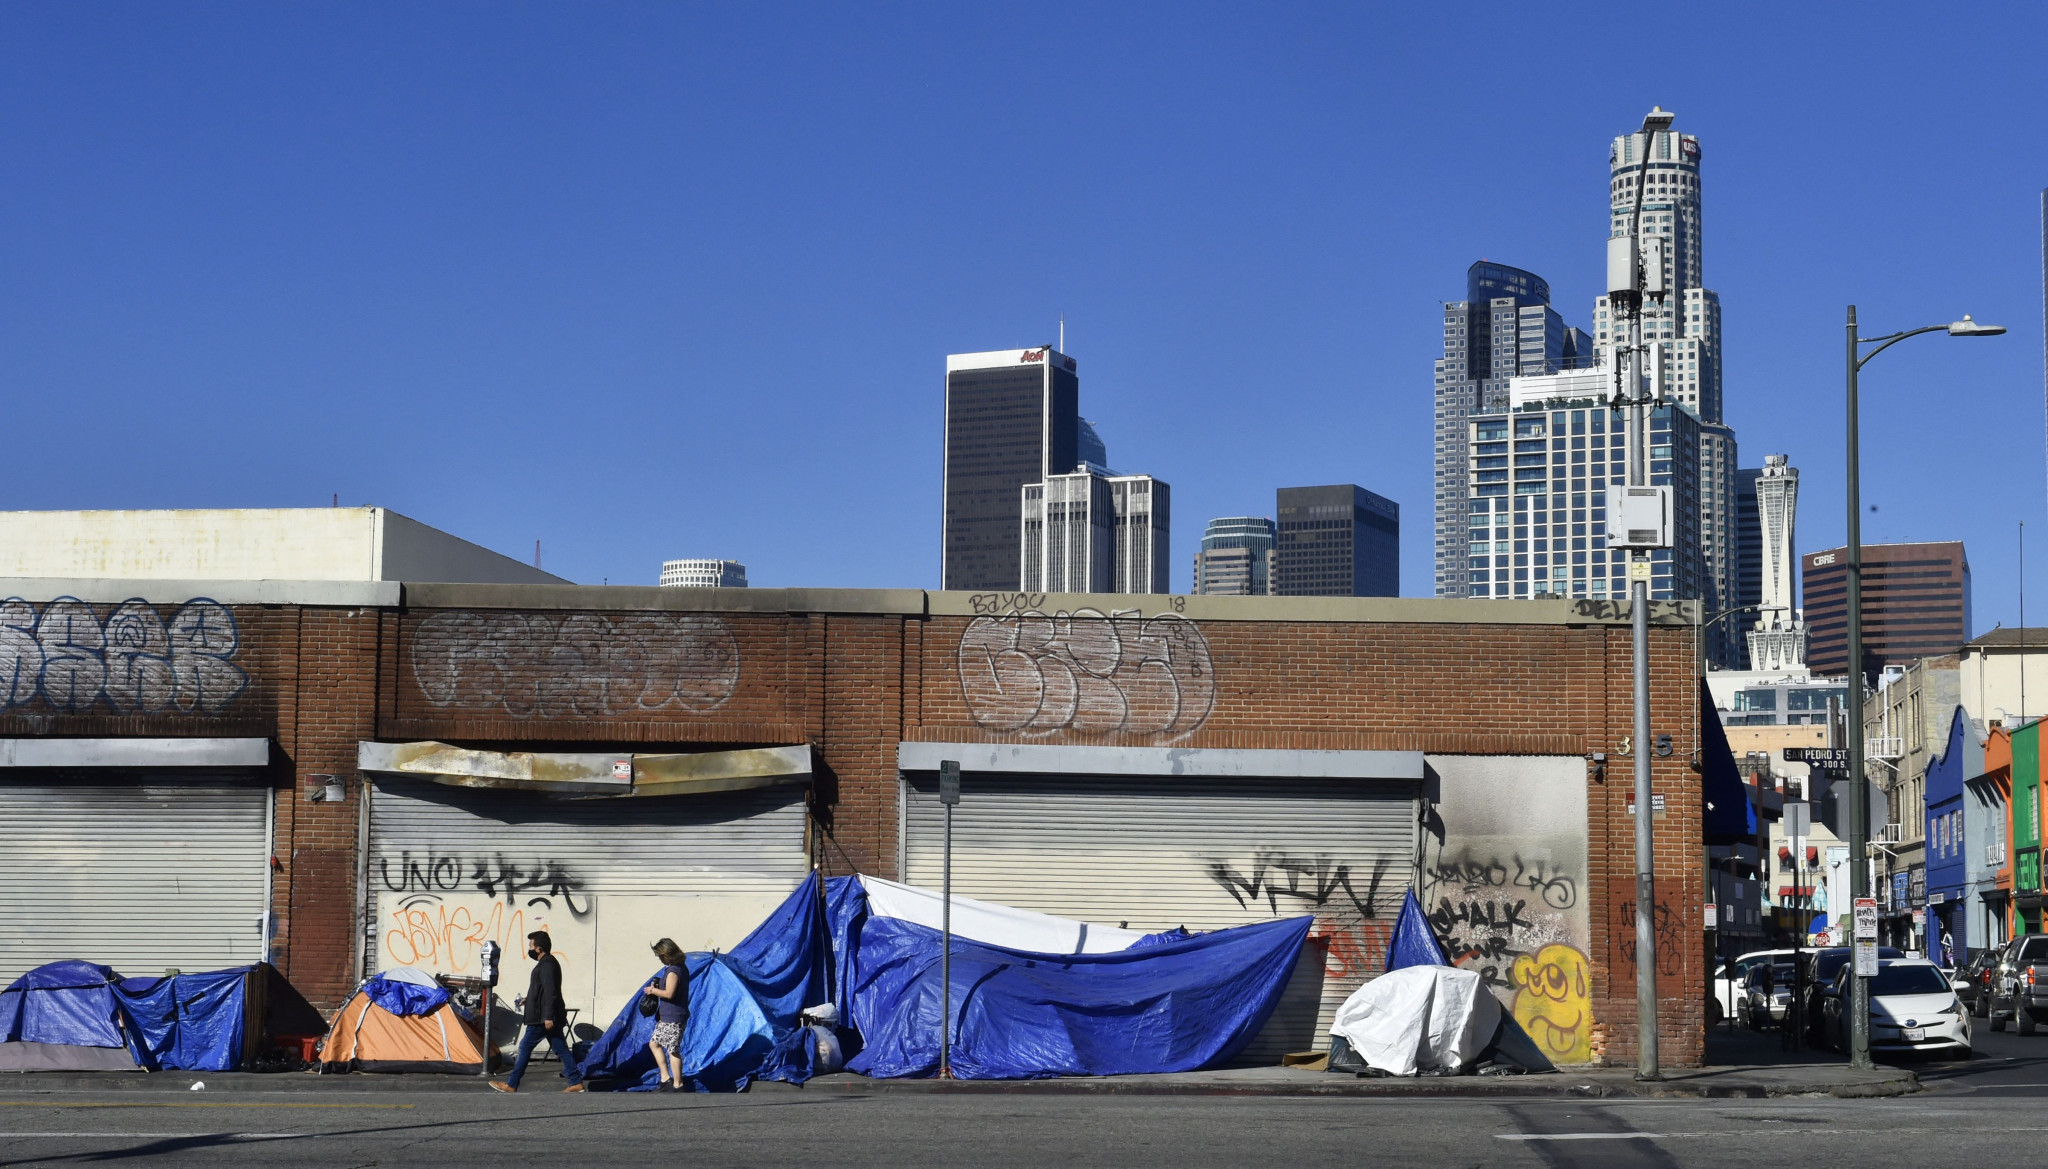 Updated state of emergency on homelessness declared in 2028 Olympics host city Los Angeles